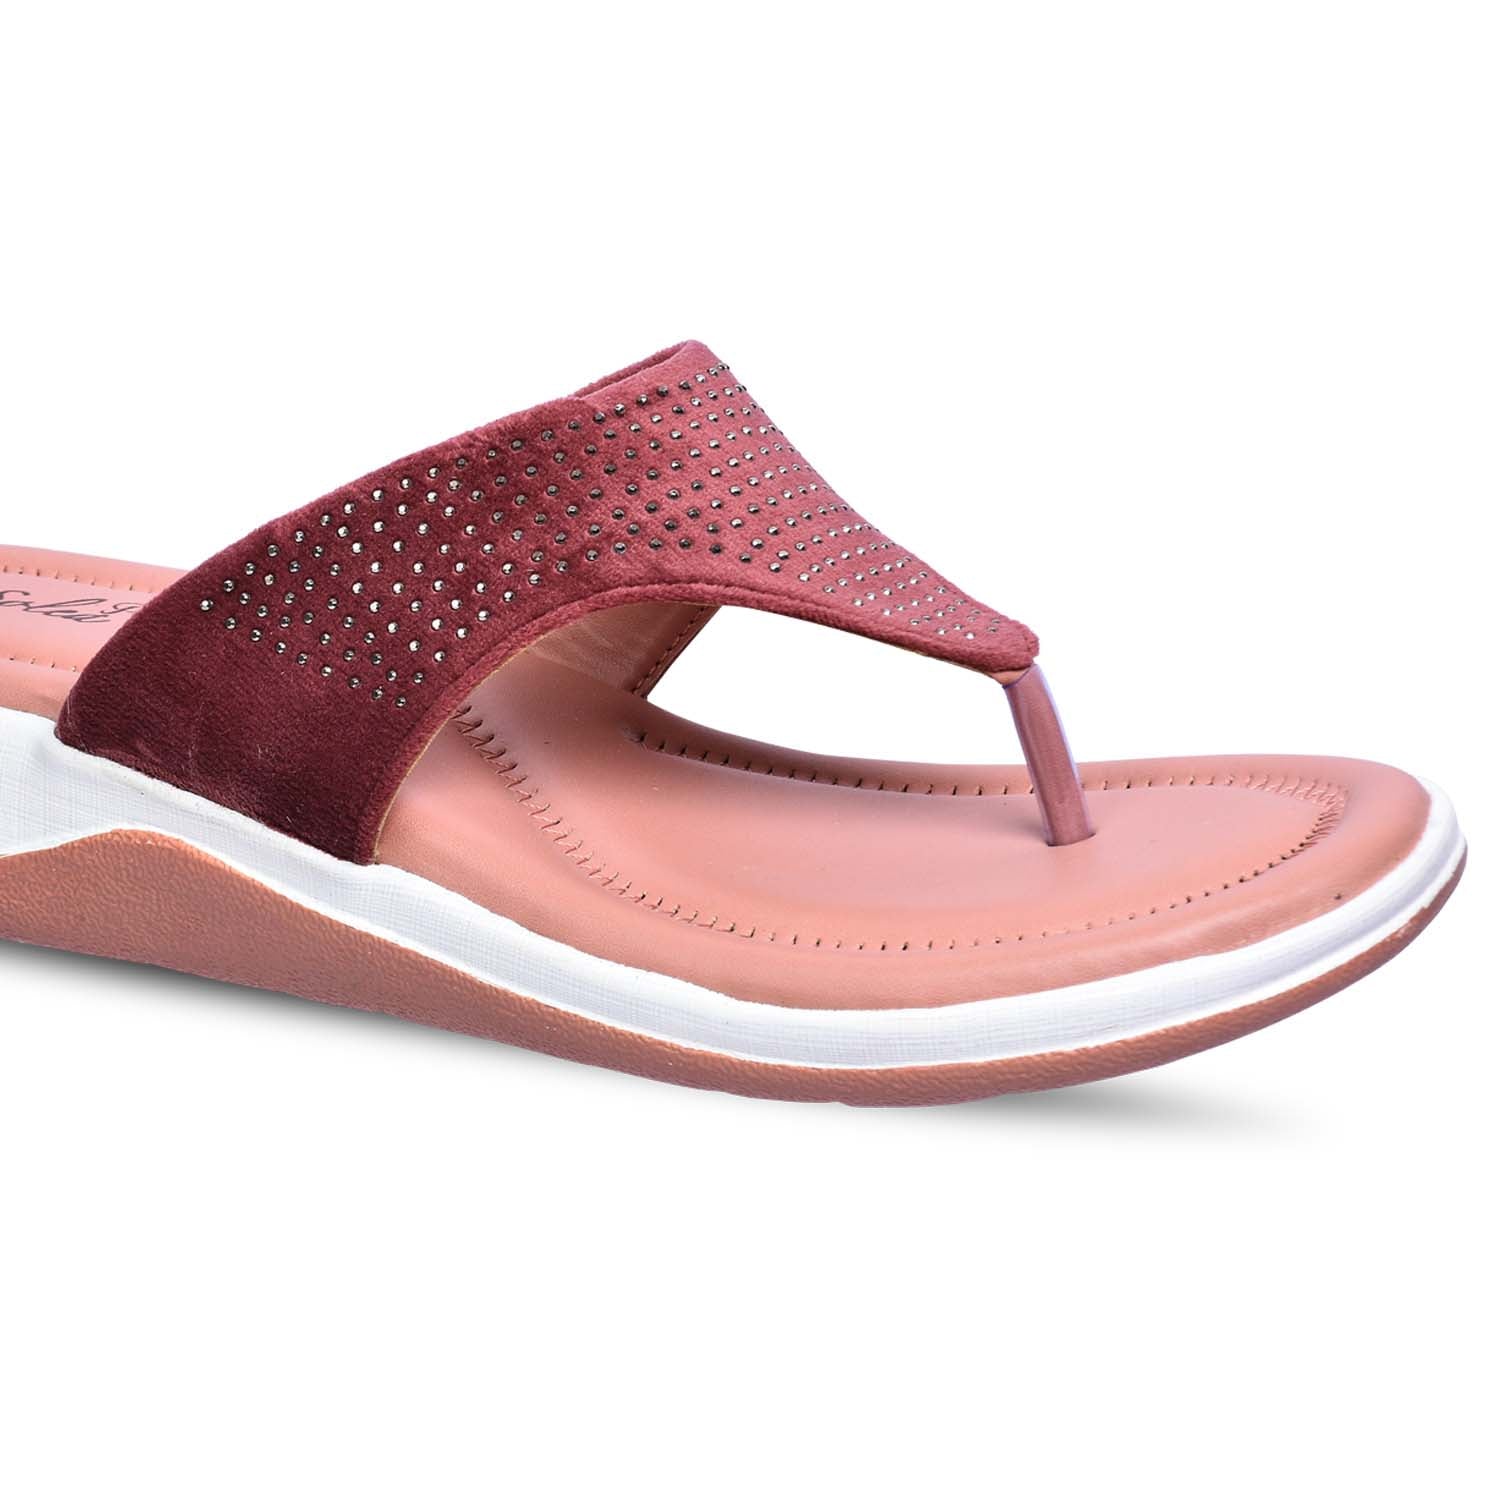 Paragon R1026L Women Sandals | Casual &amp; Formal Sandals | Stylish, Comfortable &amp; Durable | For Daily &amp; Occasion Wear